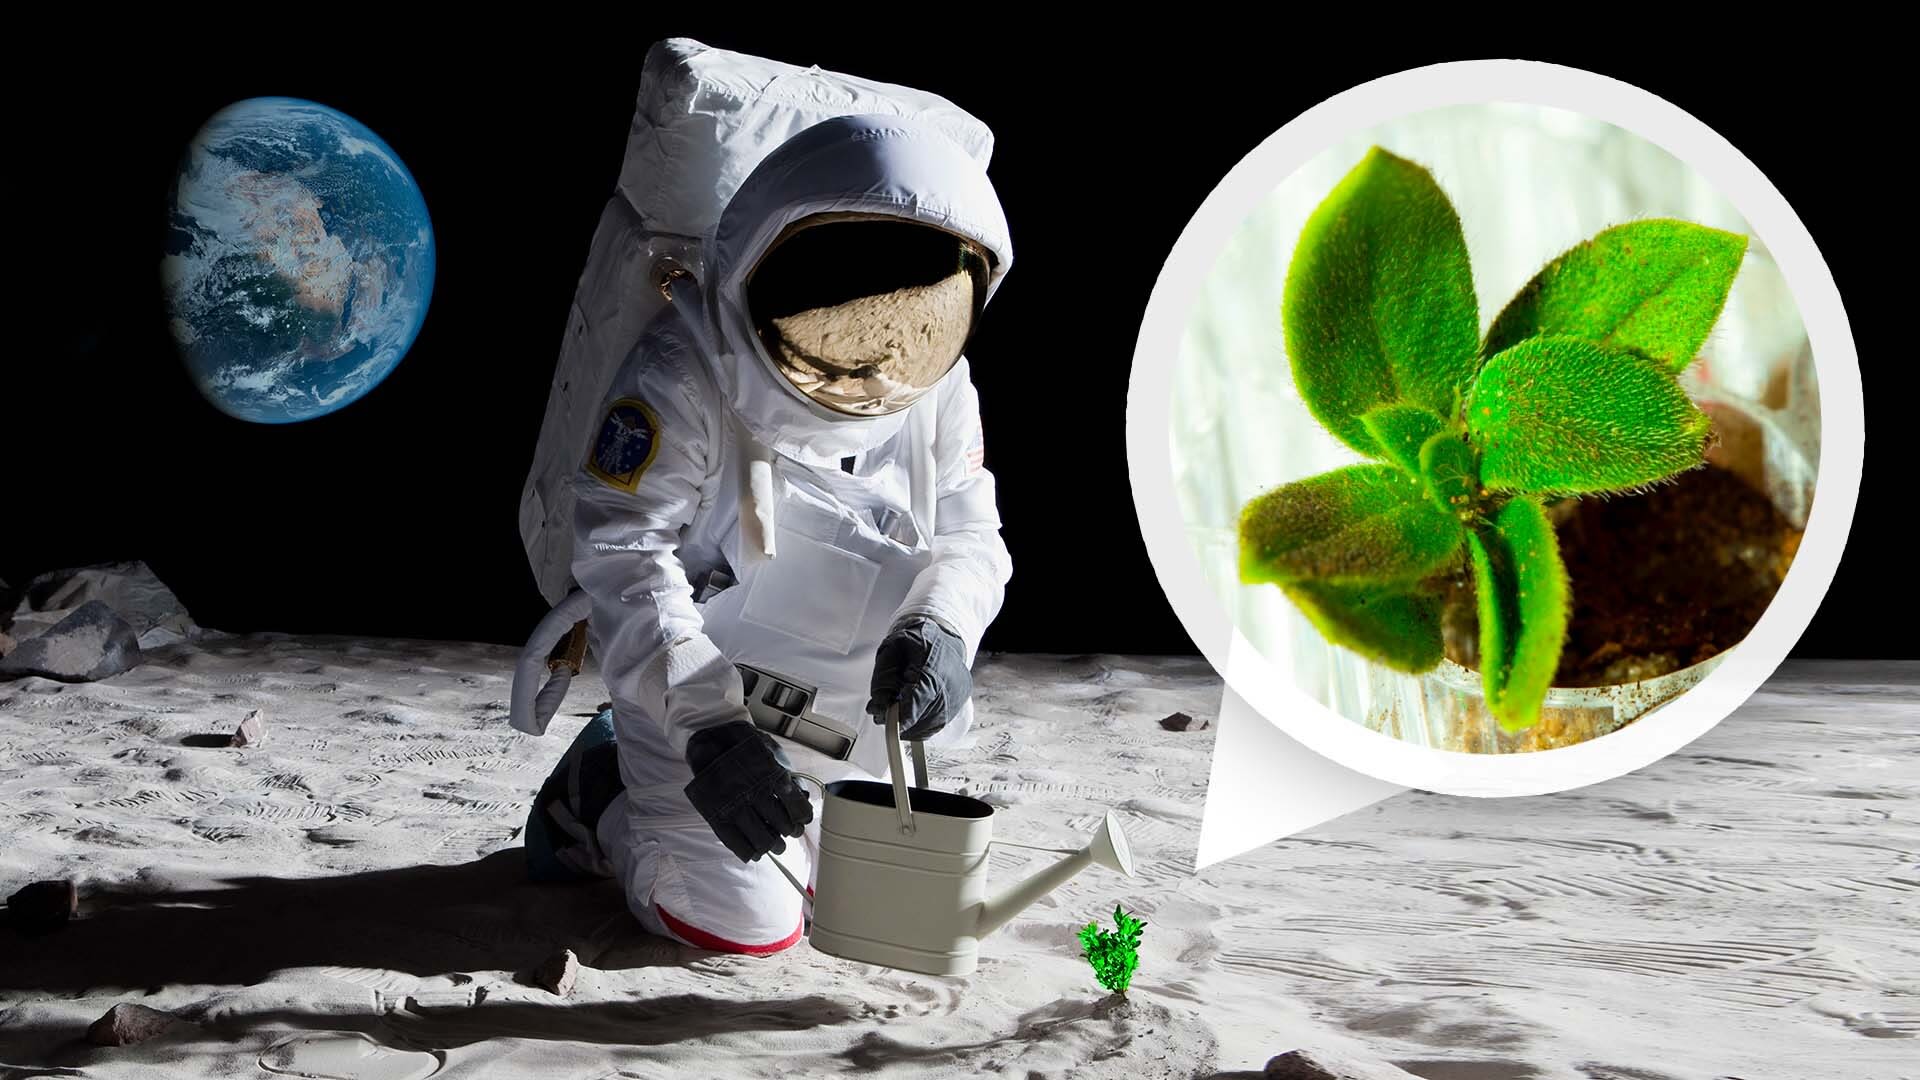 Watch How NASA Biologists Plan to Grow Plants on the Moon | Currents | WIRED